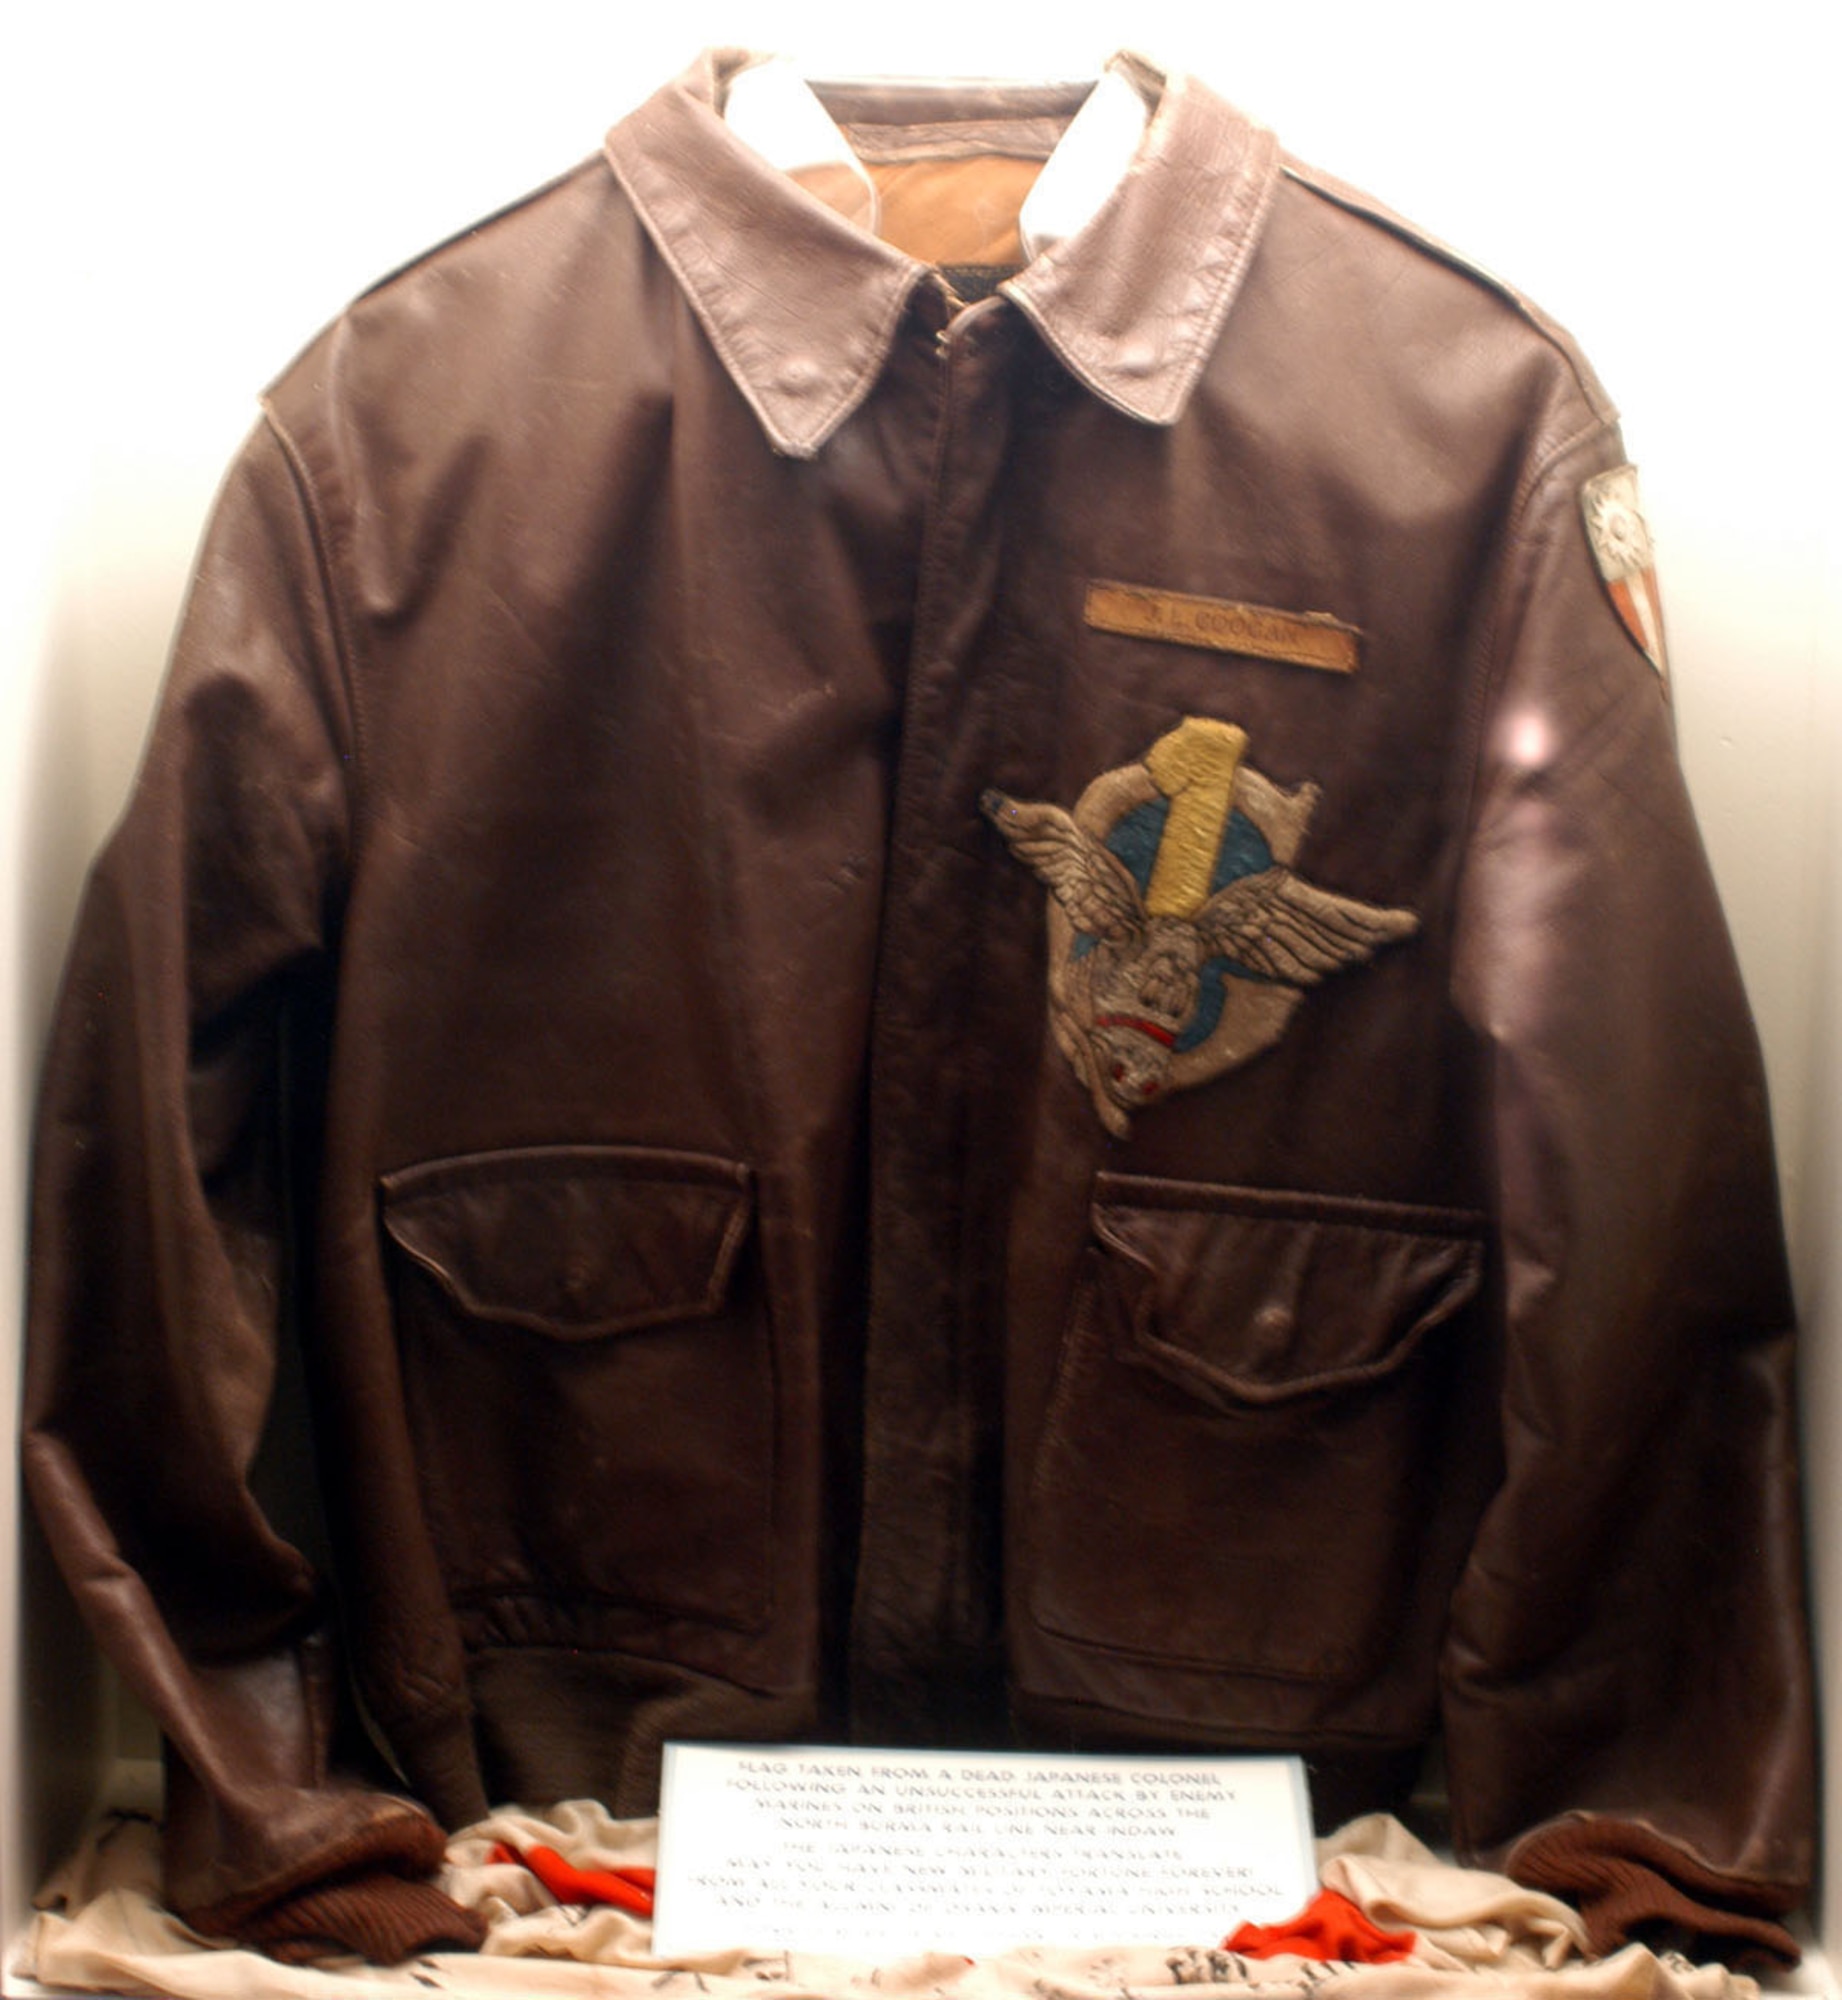 DAYTON, Ohio -- Flight Officer Jackie Coogan's  jacket is on display with the Celebrities in Uniform exhibit in the World War II Gallery at the National Museum of the United States Air Force. (U.S. Air Force photo)